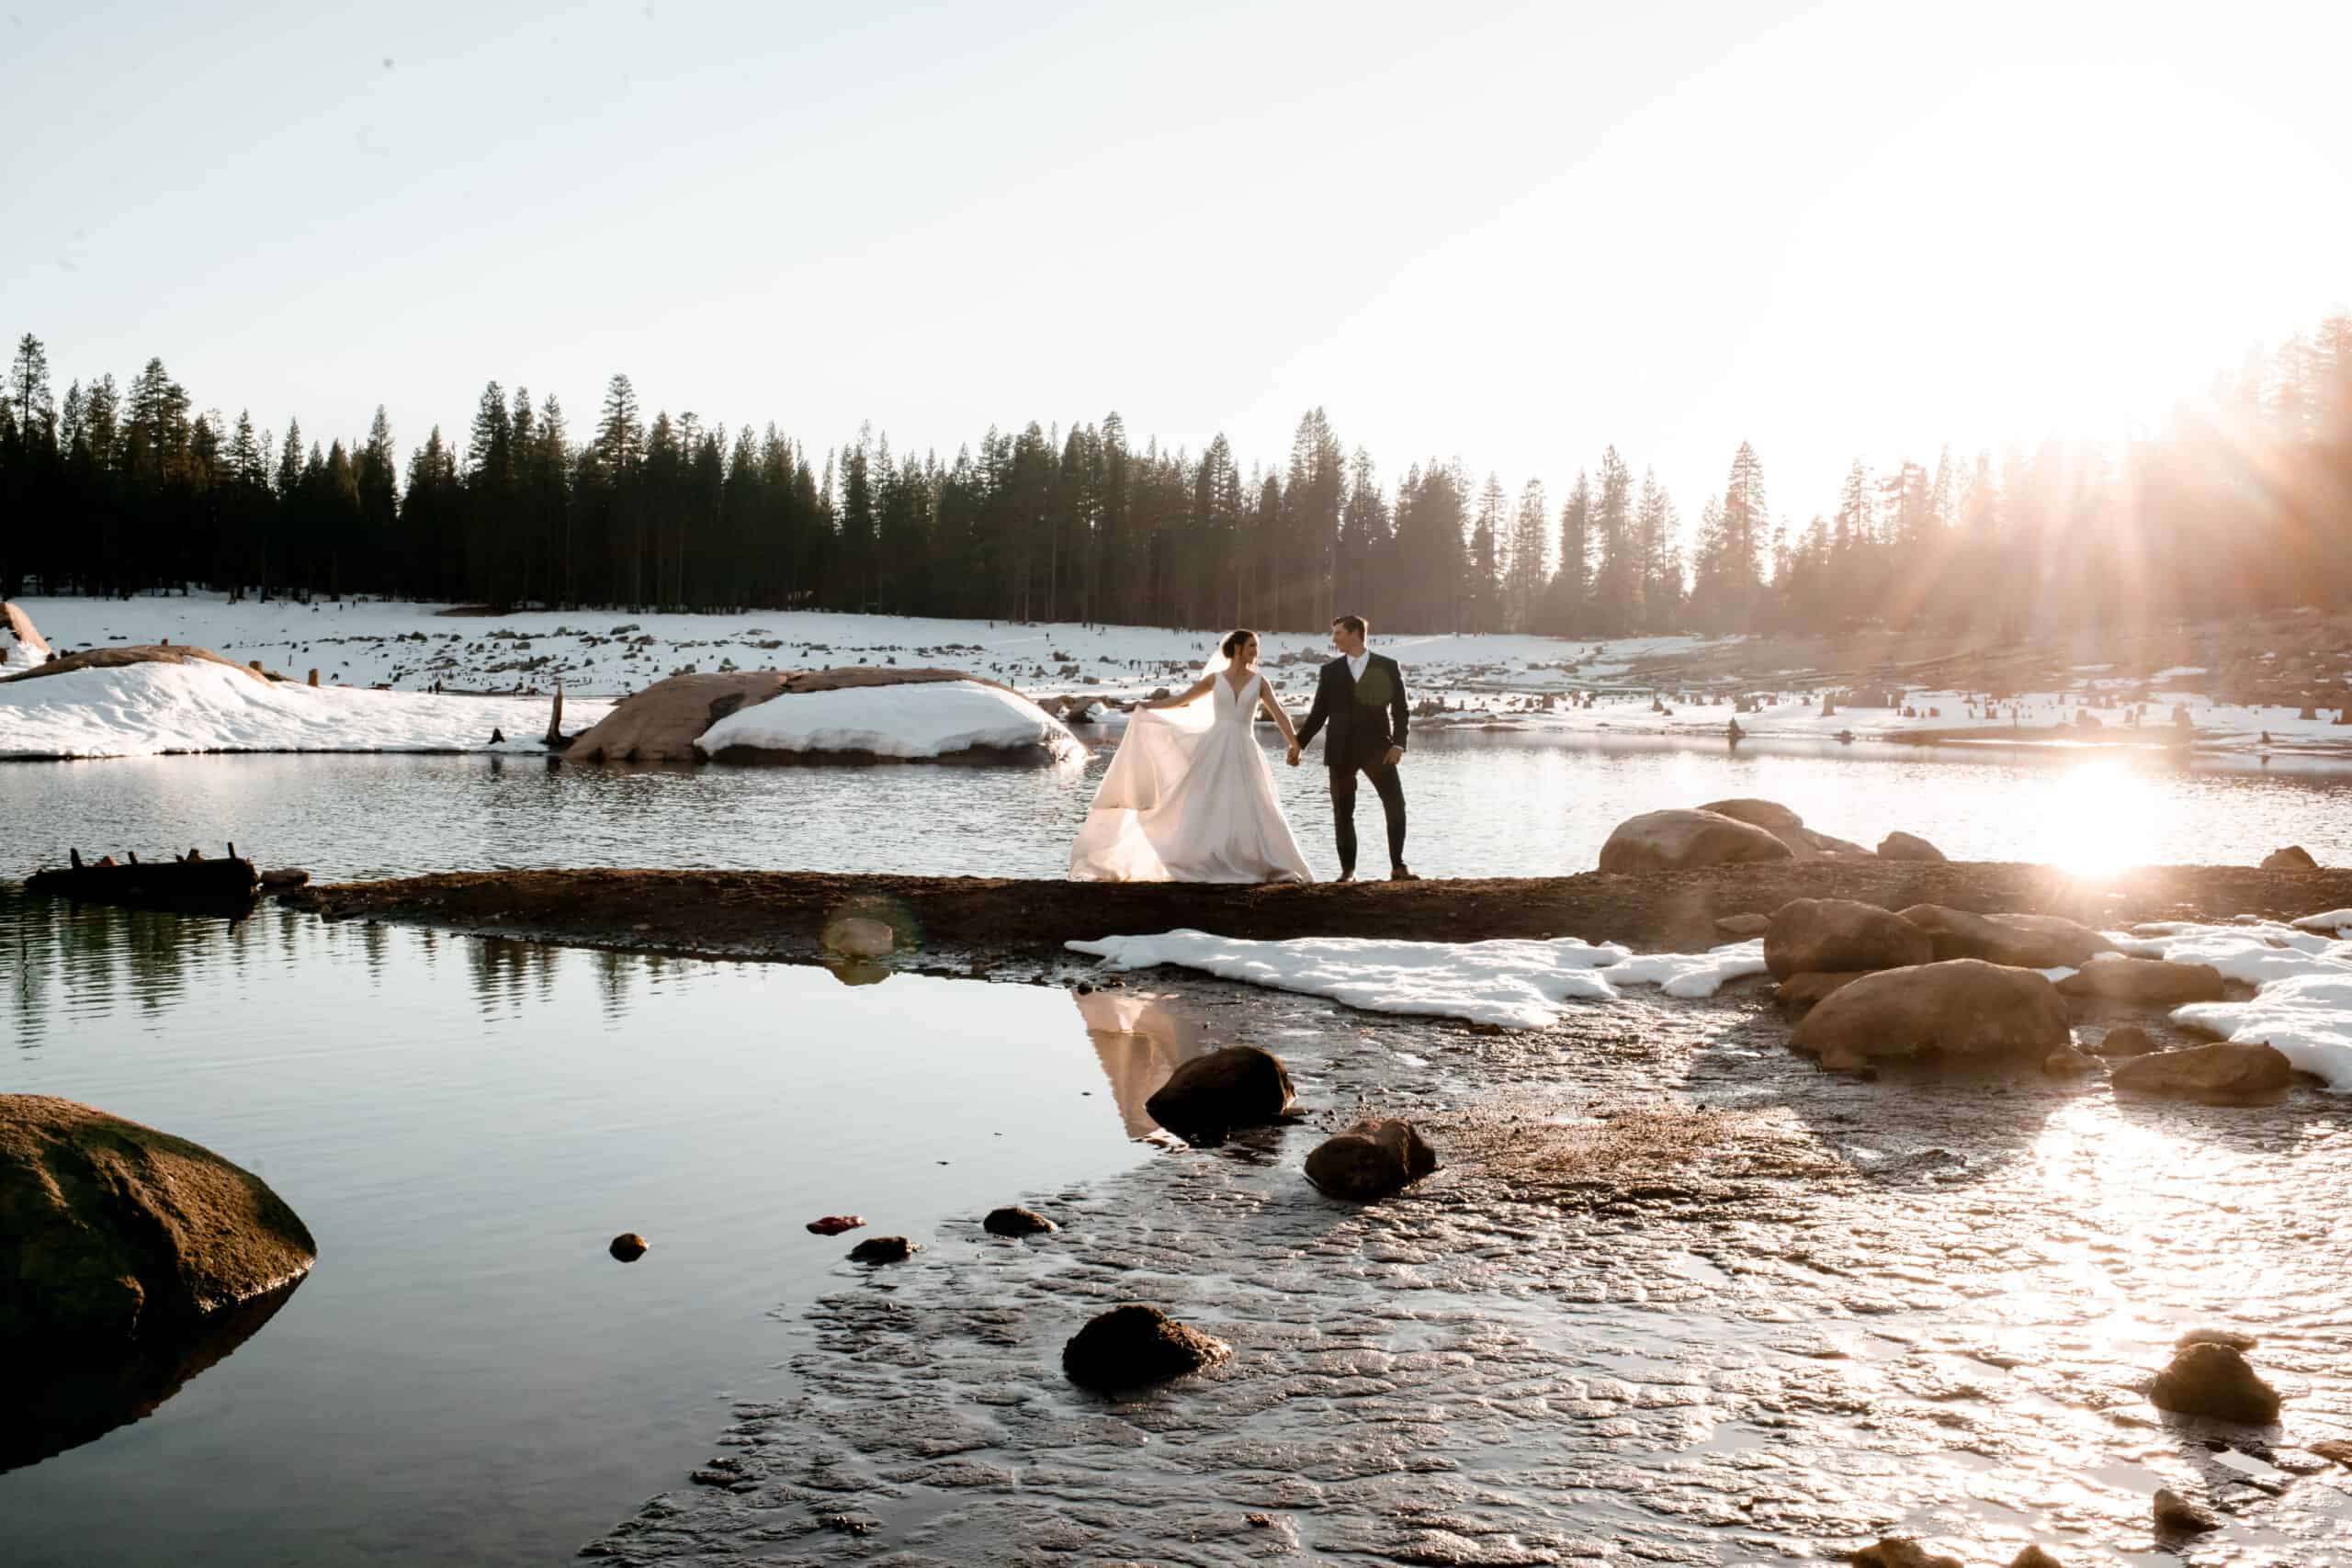 A bride and groom standing on rocks near a lake in the snow.